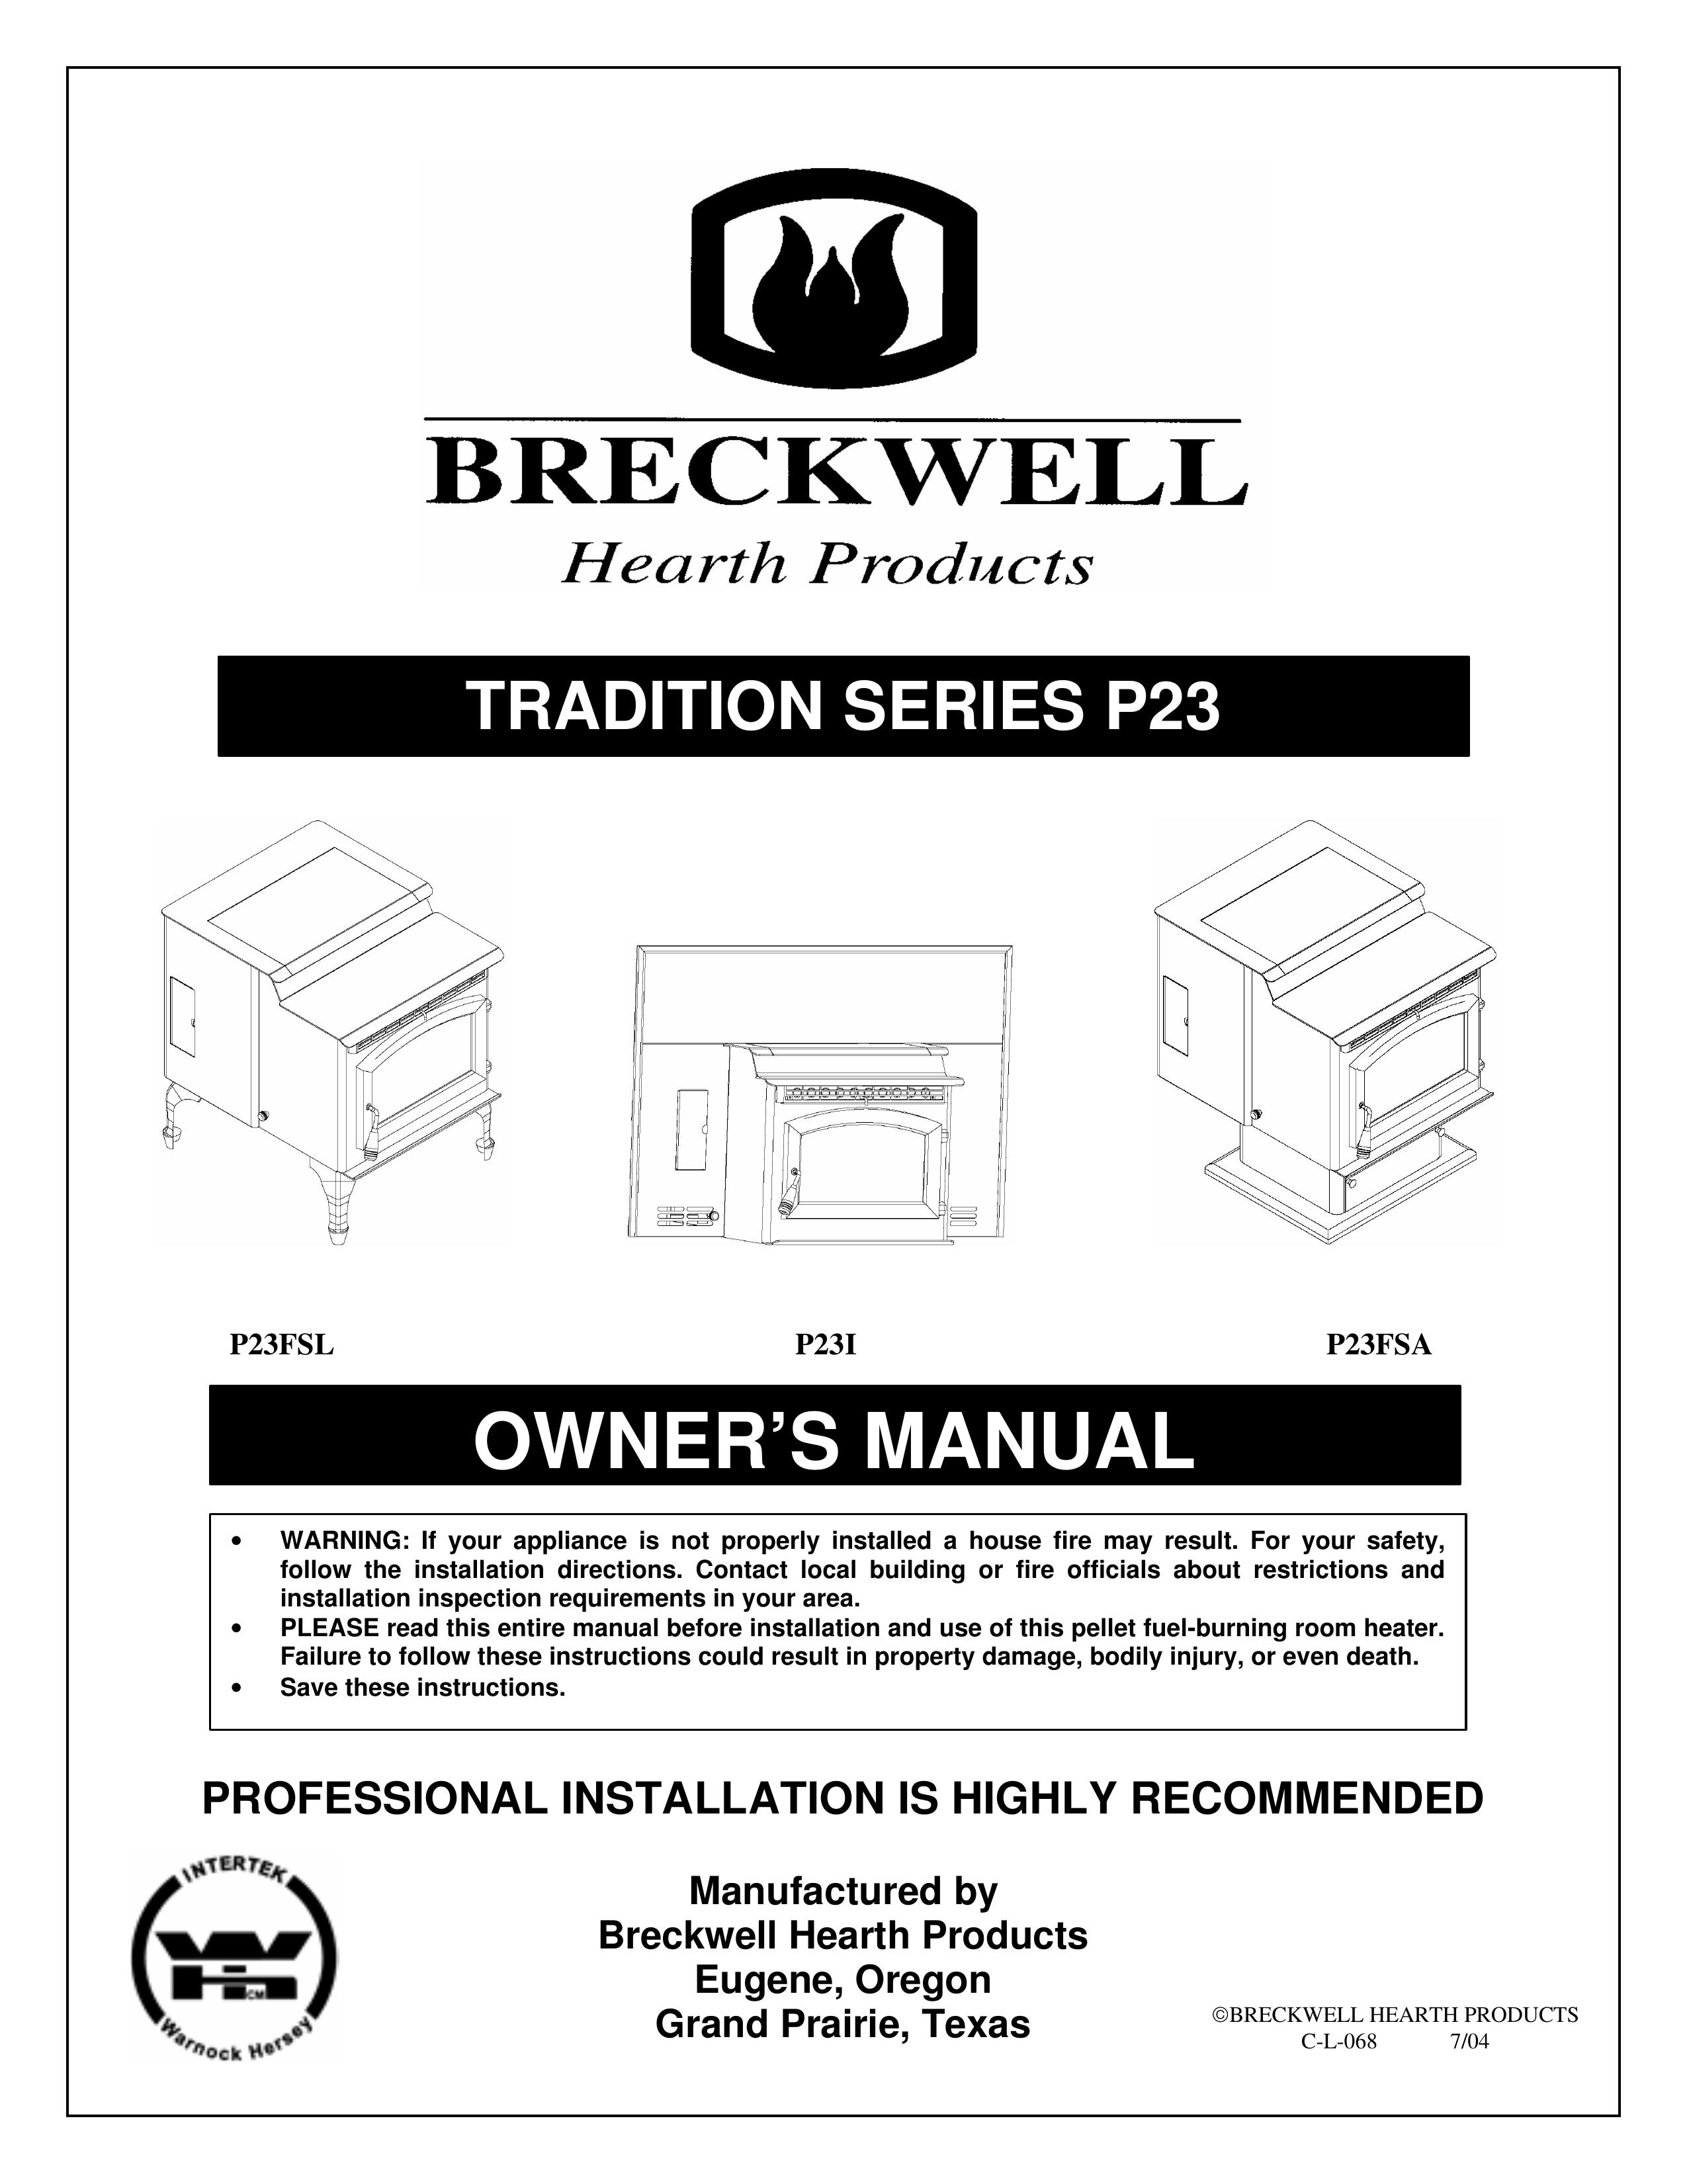 Breckwell P23FSL Fire Pit User Manual (Page 1)